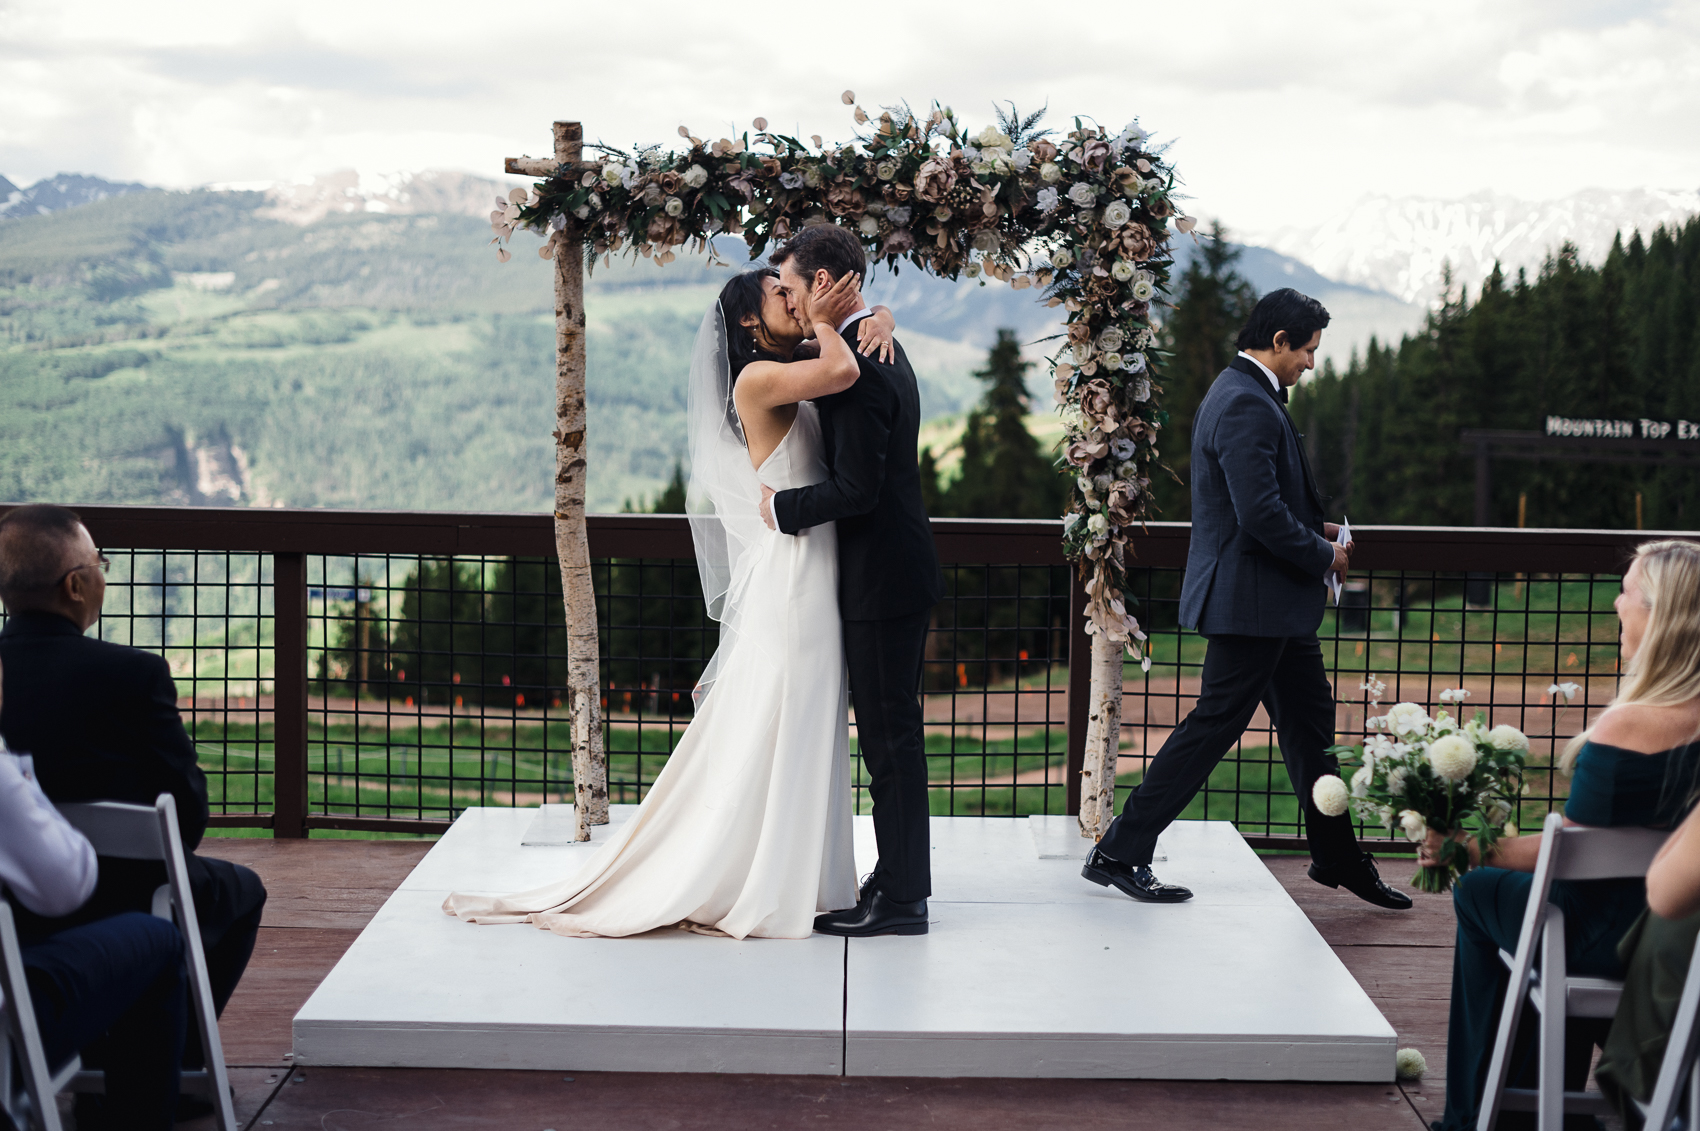 A stunning summer wedding ceremony at The 10th Vail, with the couple exchanging vows against a backdrop of breathtaking mountain views.